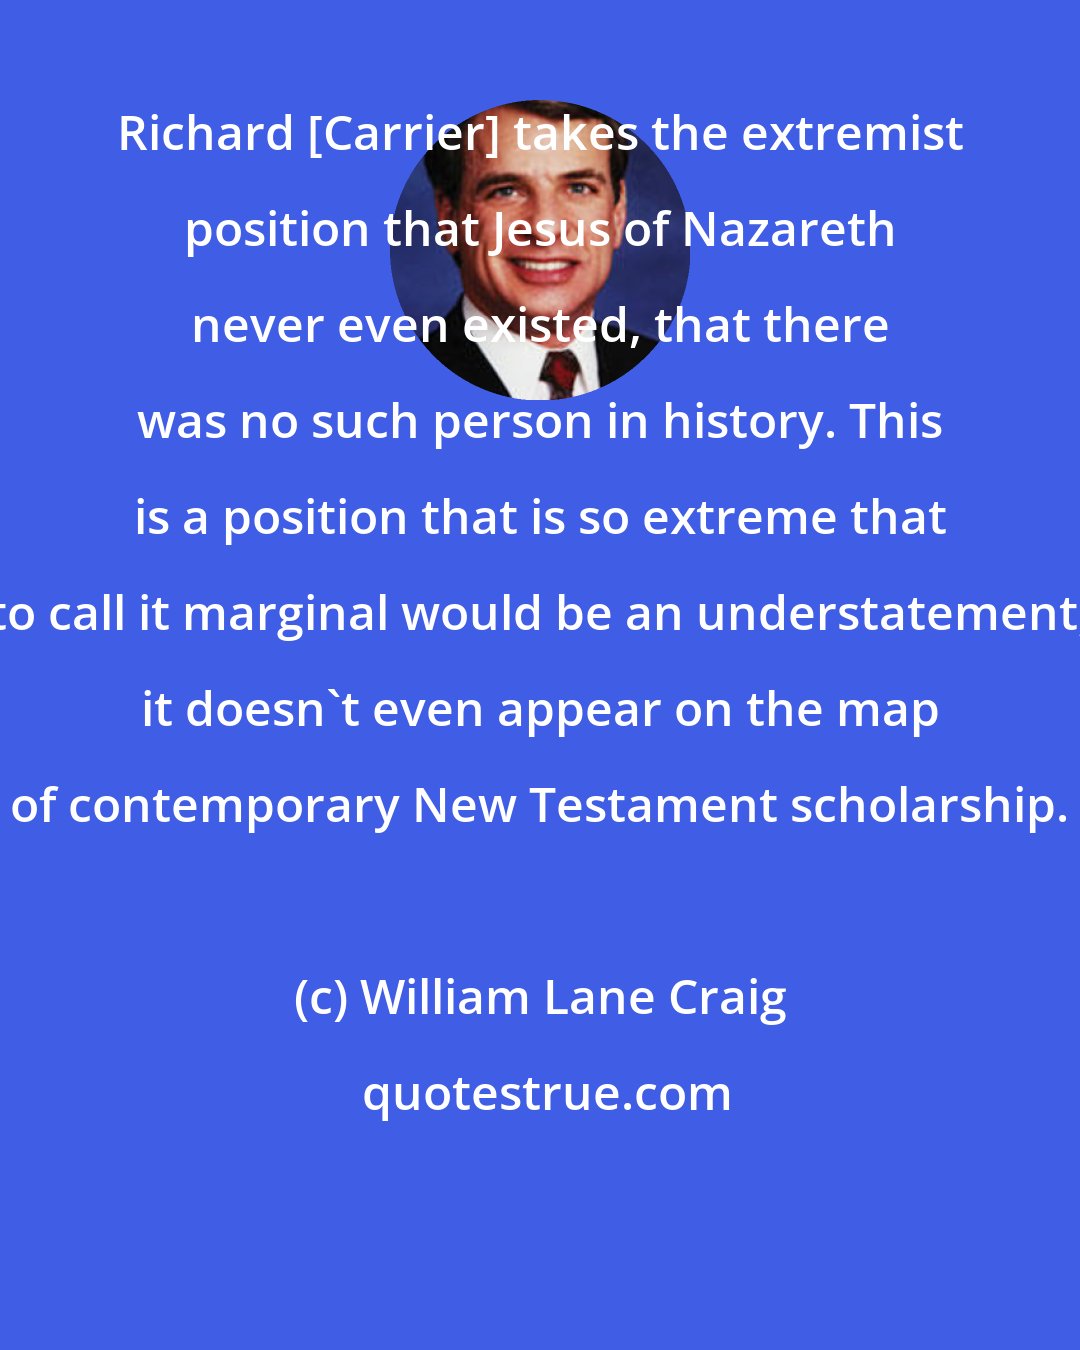 William Lane Craig: Richard [Carrier] takes the extremist position that Jesus of Nazareth never even existed, that there was no such person in history. This is a position that is so extreme that to call it marginal would be an understatement; it doesn't even appear on the map of contemporary New Testament scholarship.